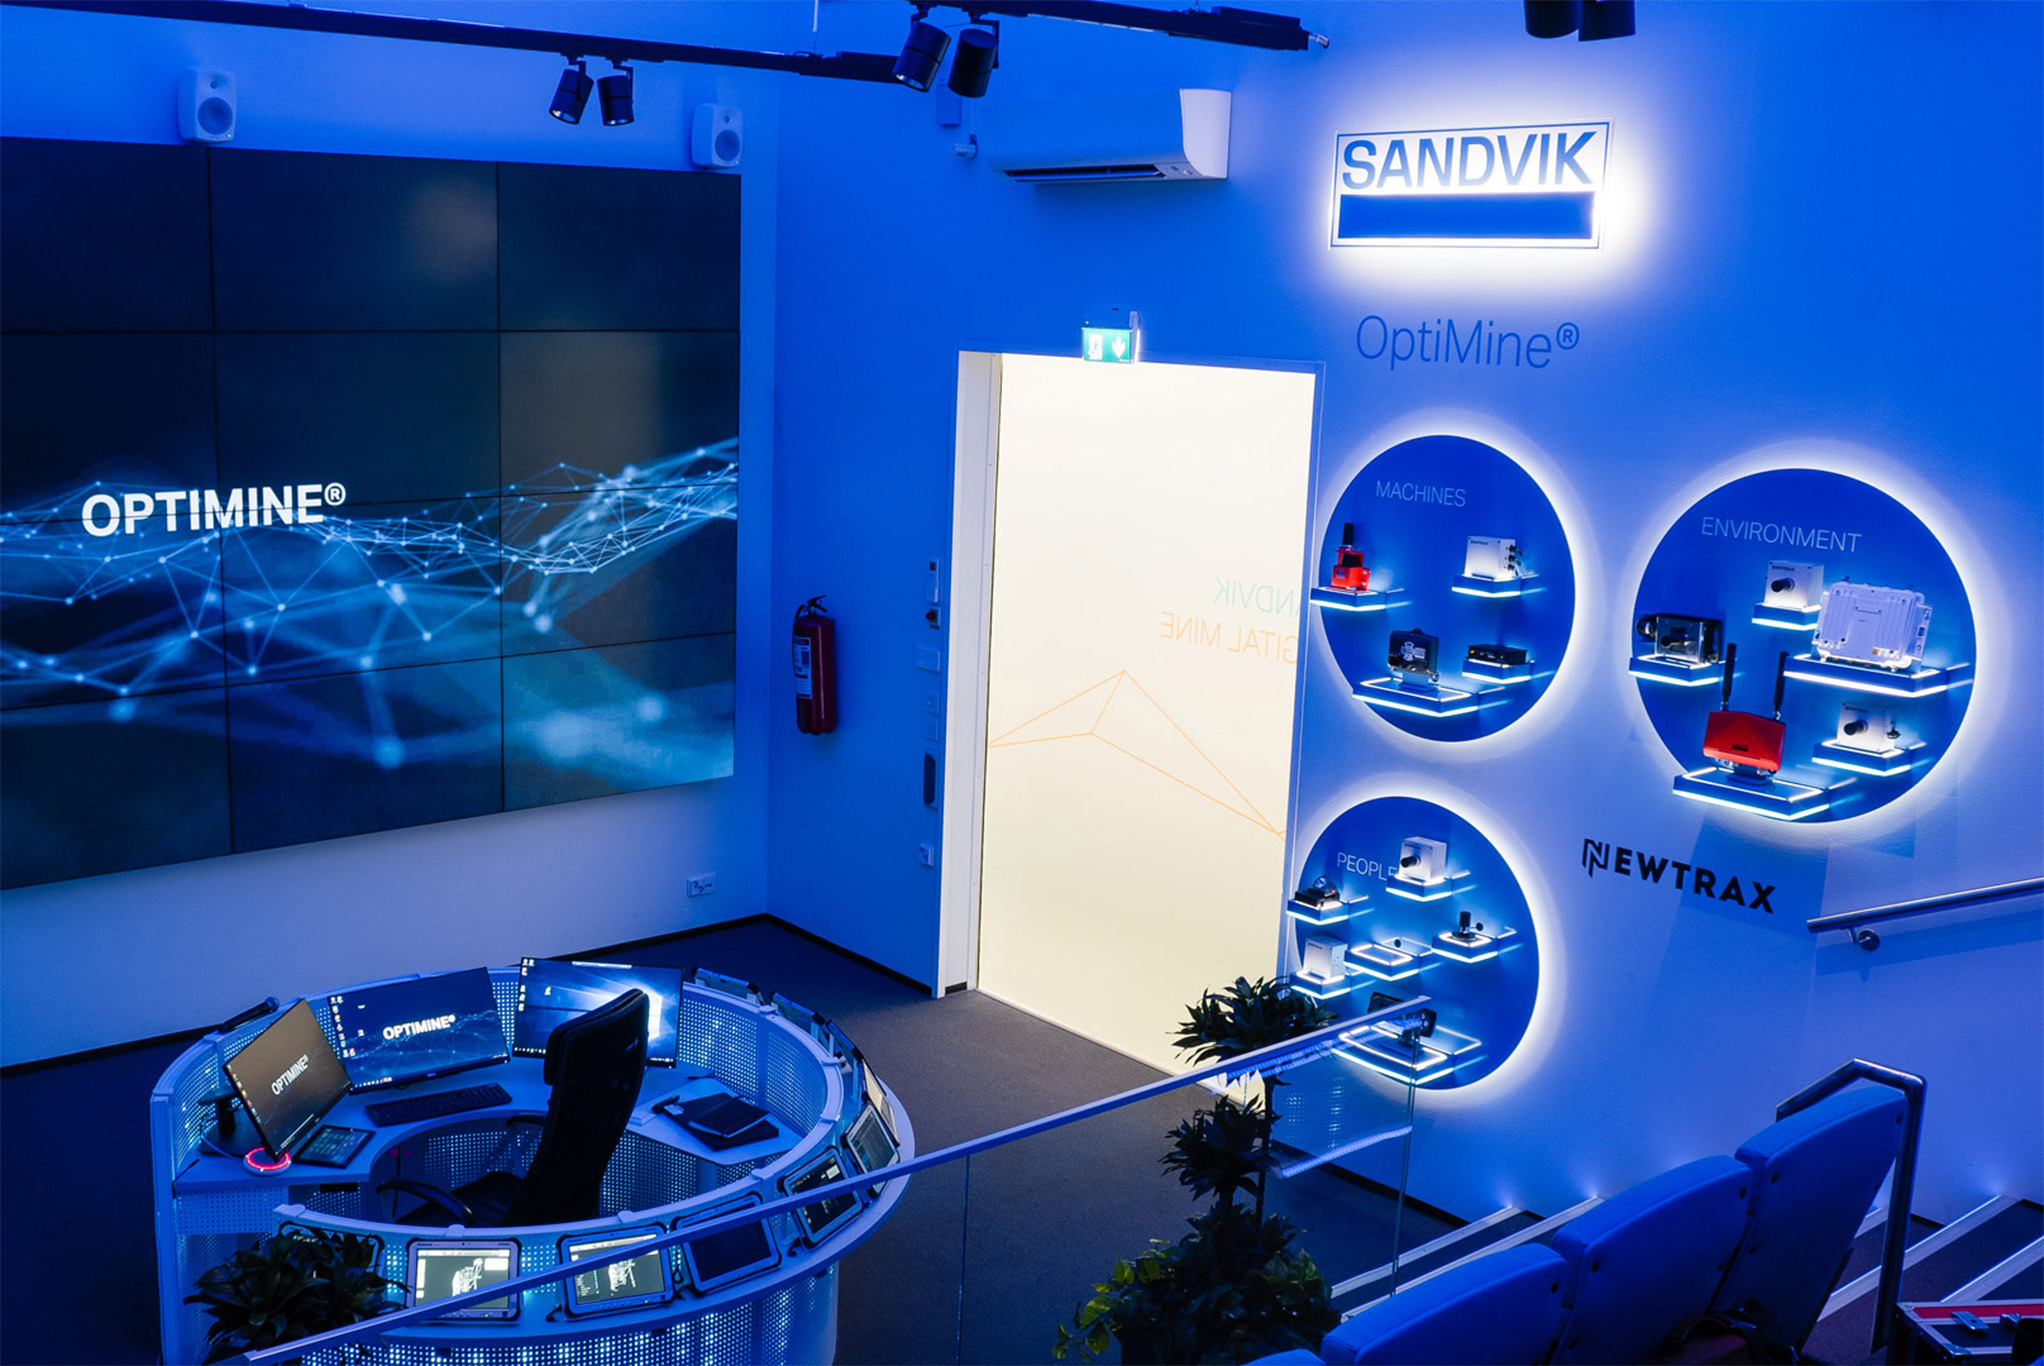 OptiMine® Showroom is a demo room of Sandvik in Tampere, where lighting is an integrated part of the showroom use.